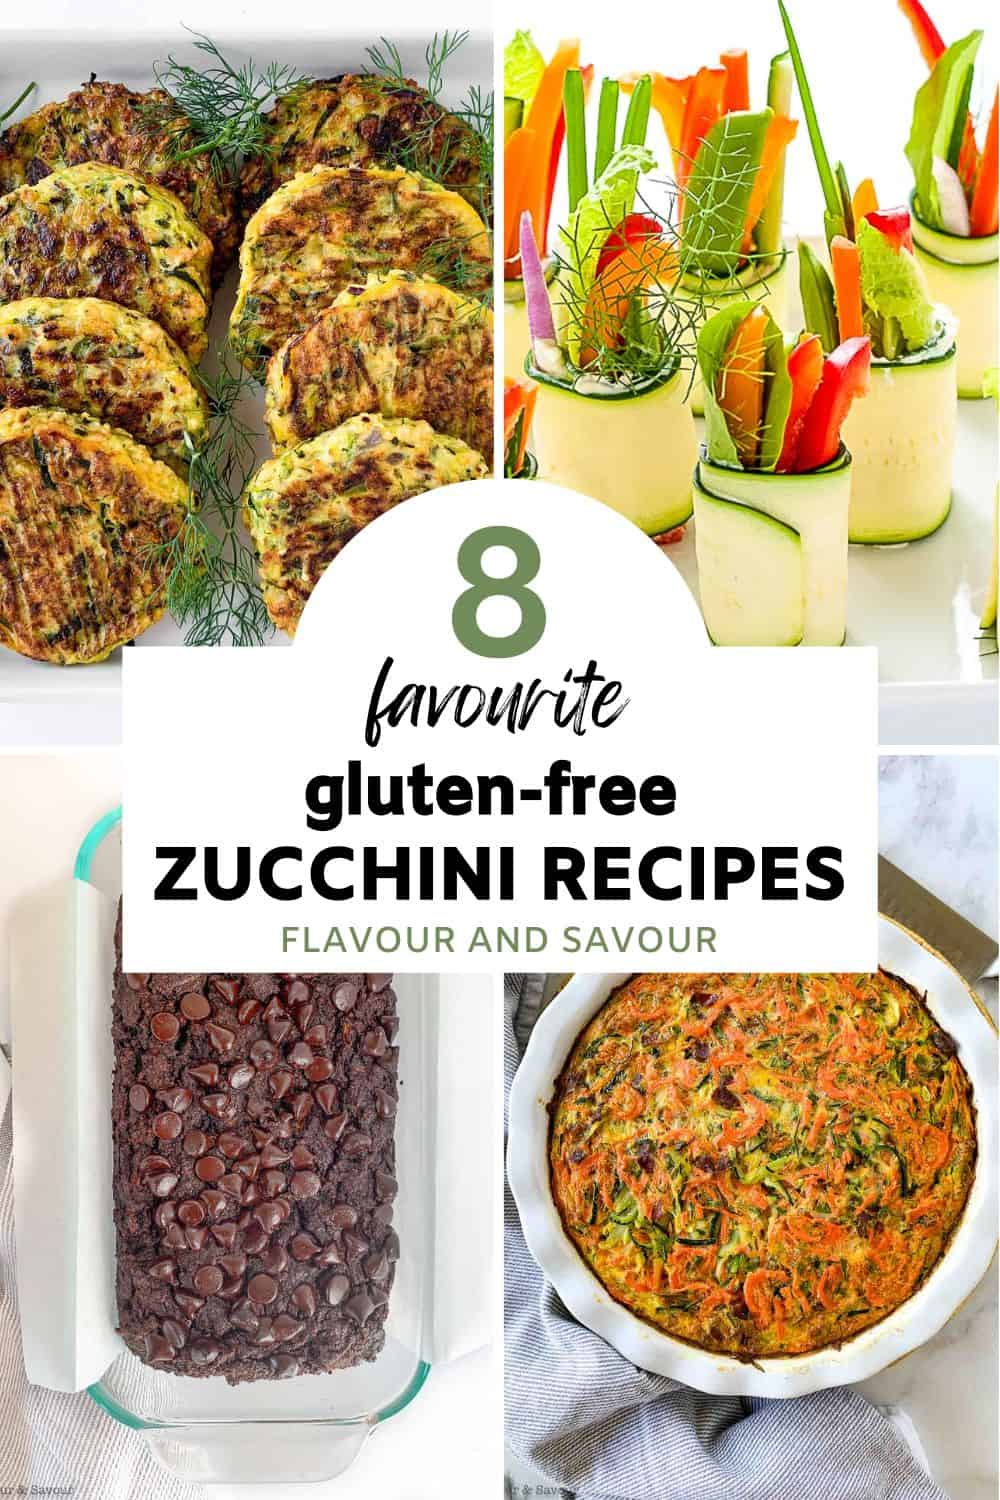 A collage of images of zucchini dishes with text overlay reading 8 favourite gluten-free zucchini recipes.